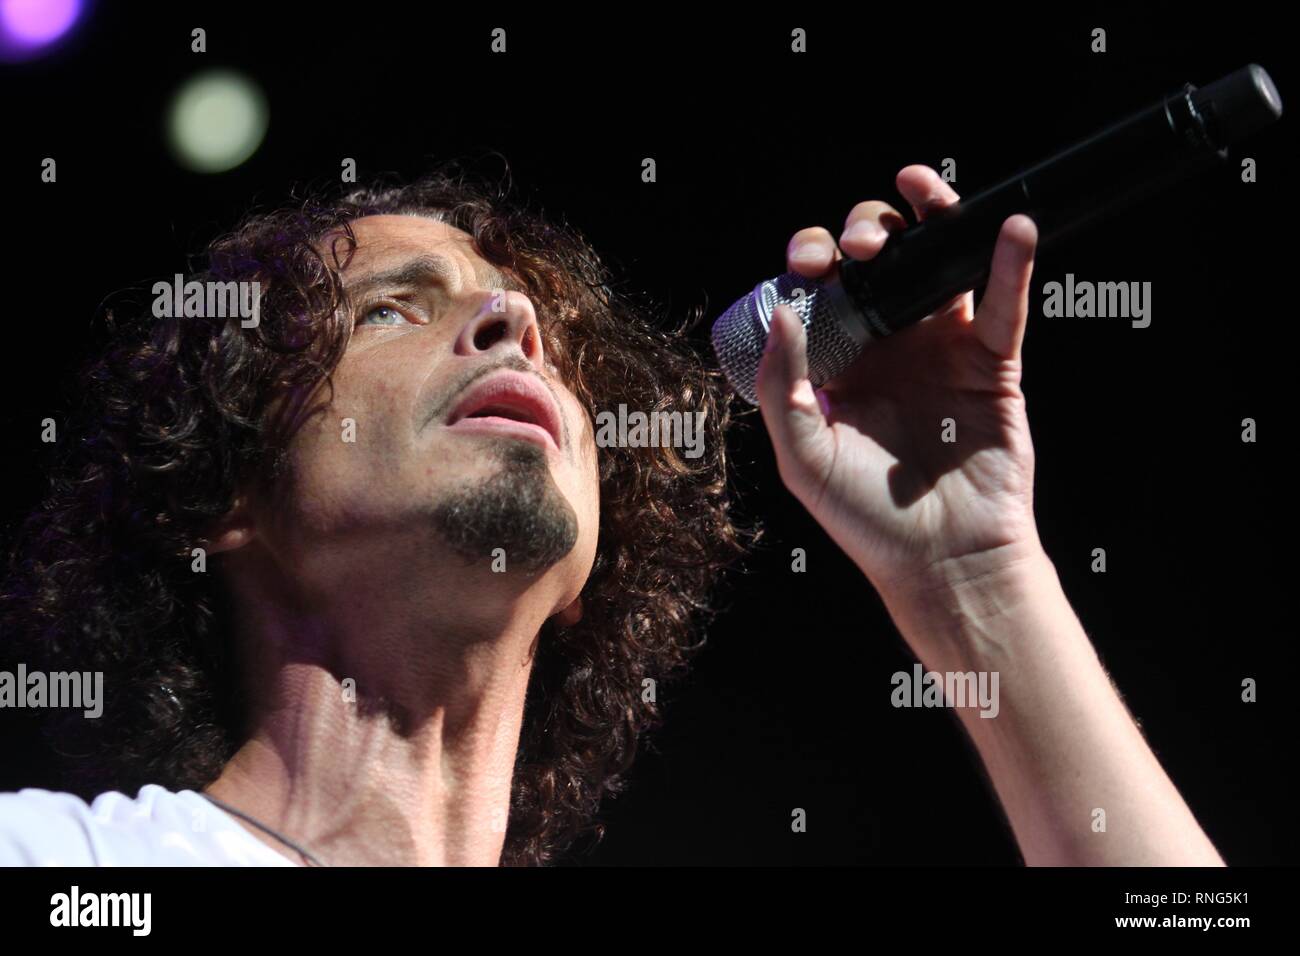 Rock musician best known as the lead singer and songwriter for rock bands Soundgarden and Audioslave, Chris Cornell, is shown performing on stage during a 'live' concert appearance. Stock Photo